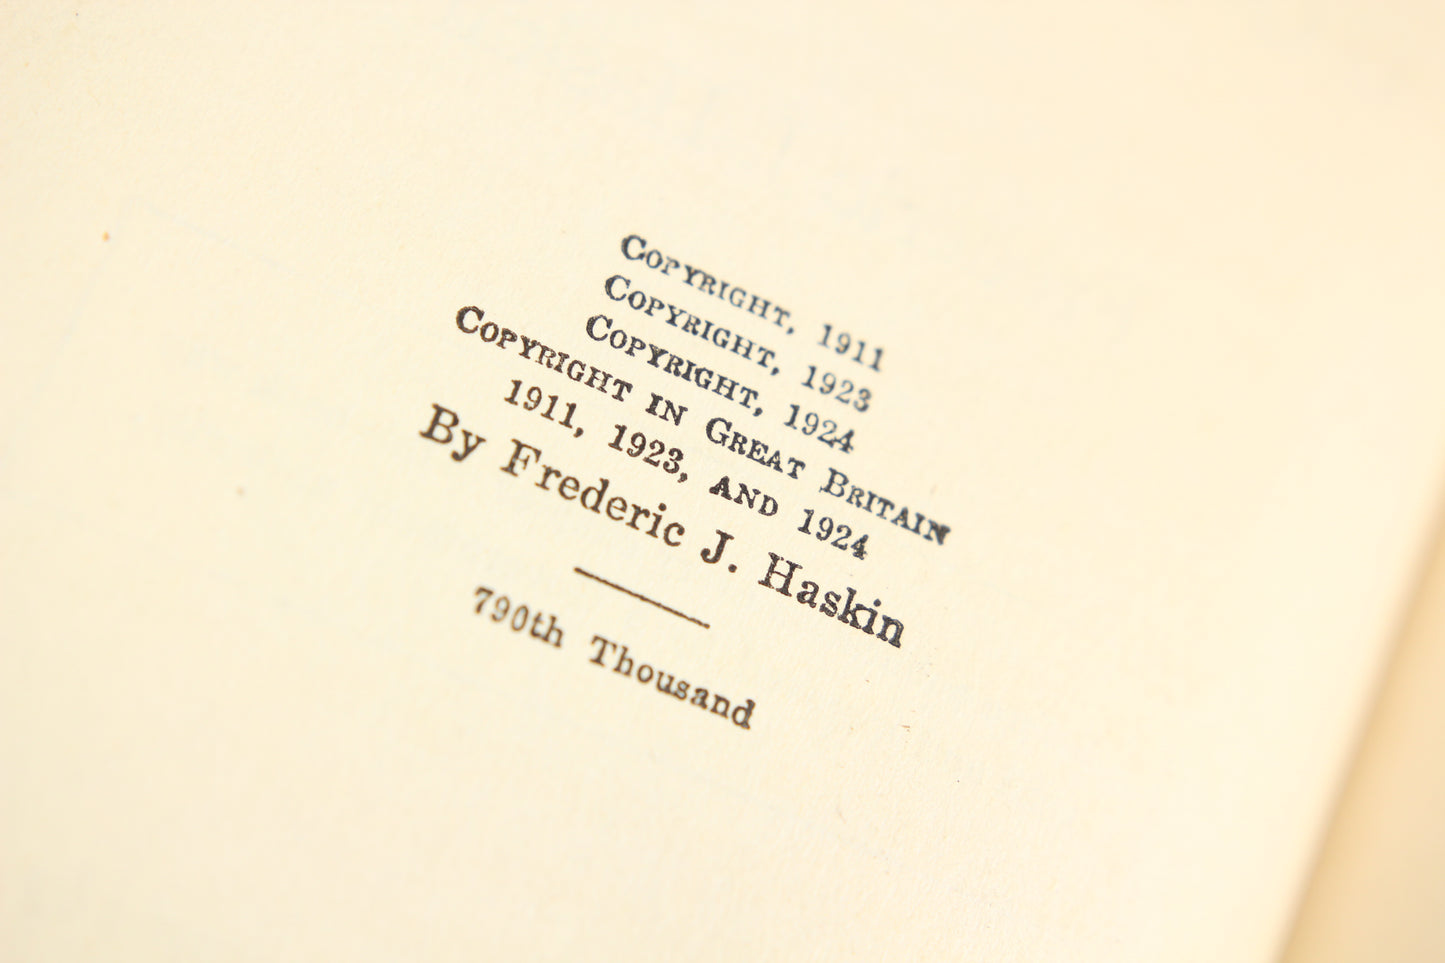 The American Government by Frderic J. Haskin, Copyright 1924